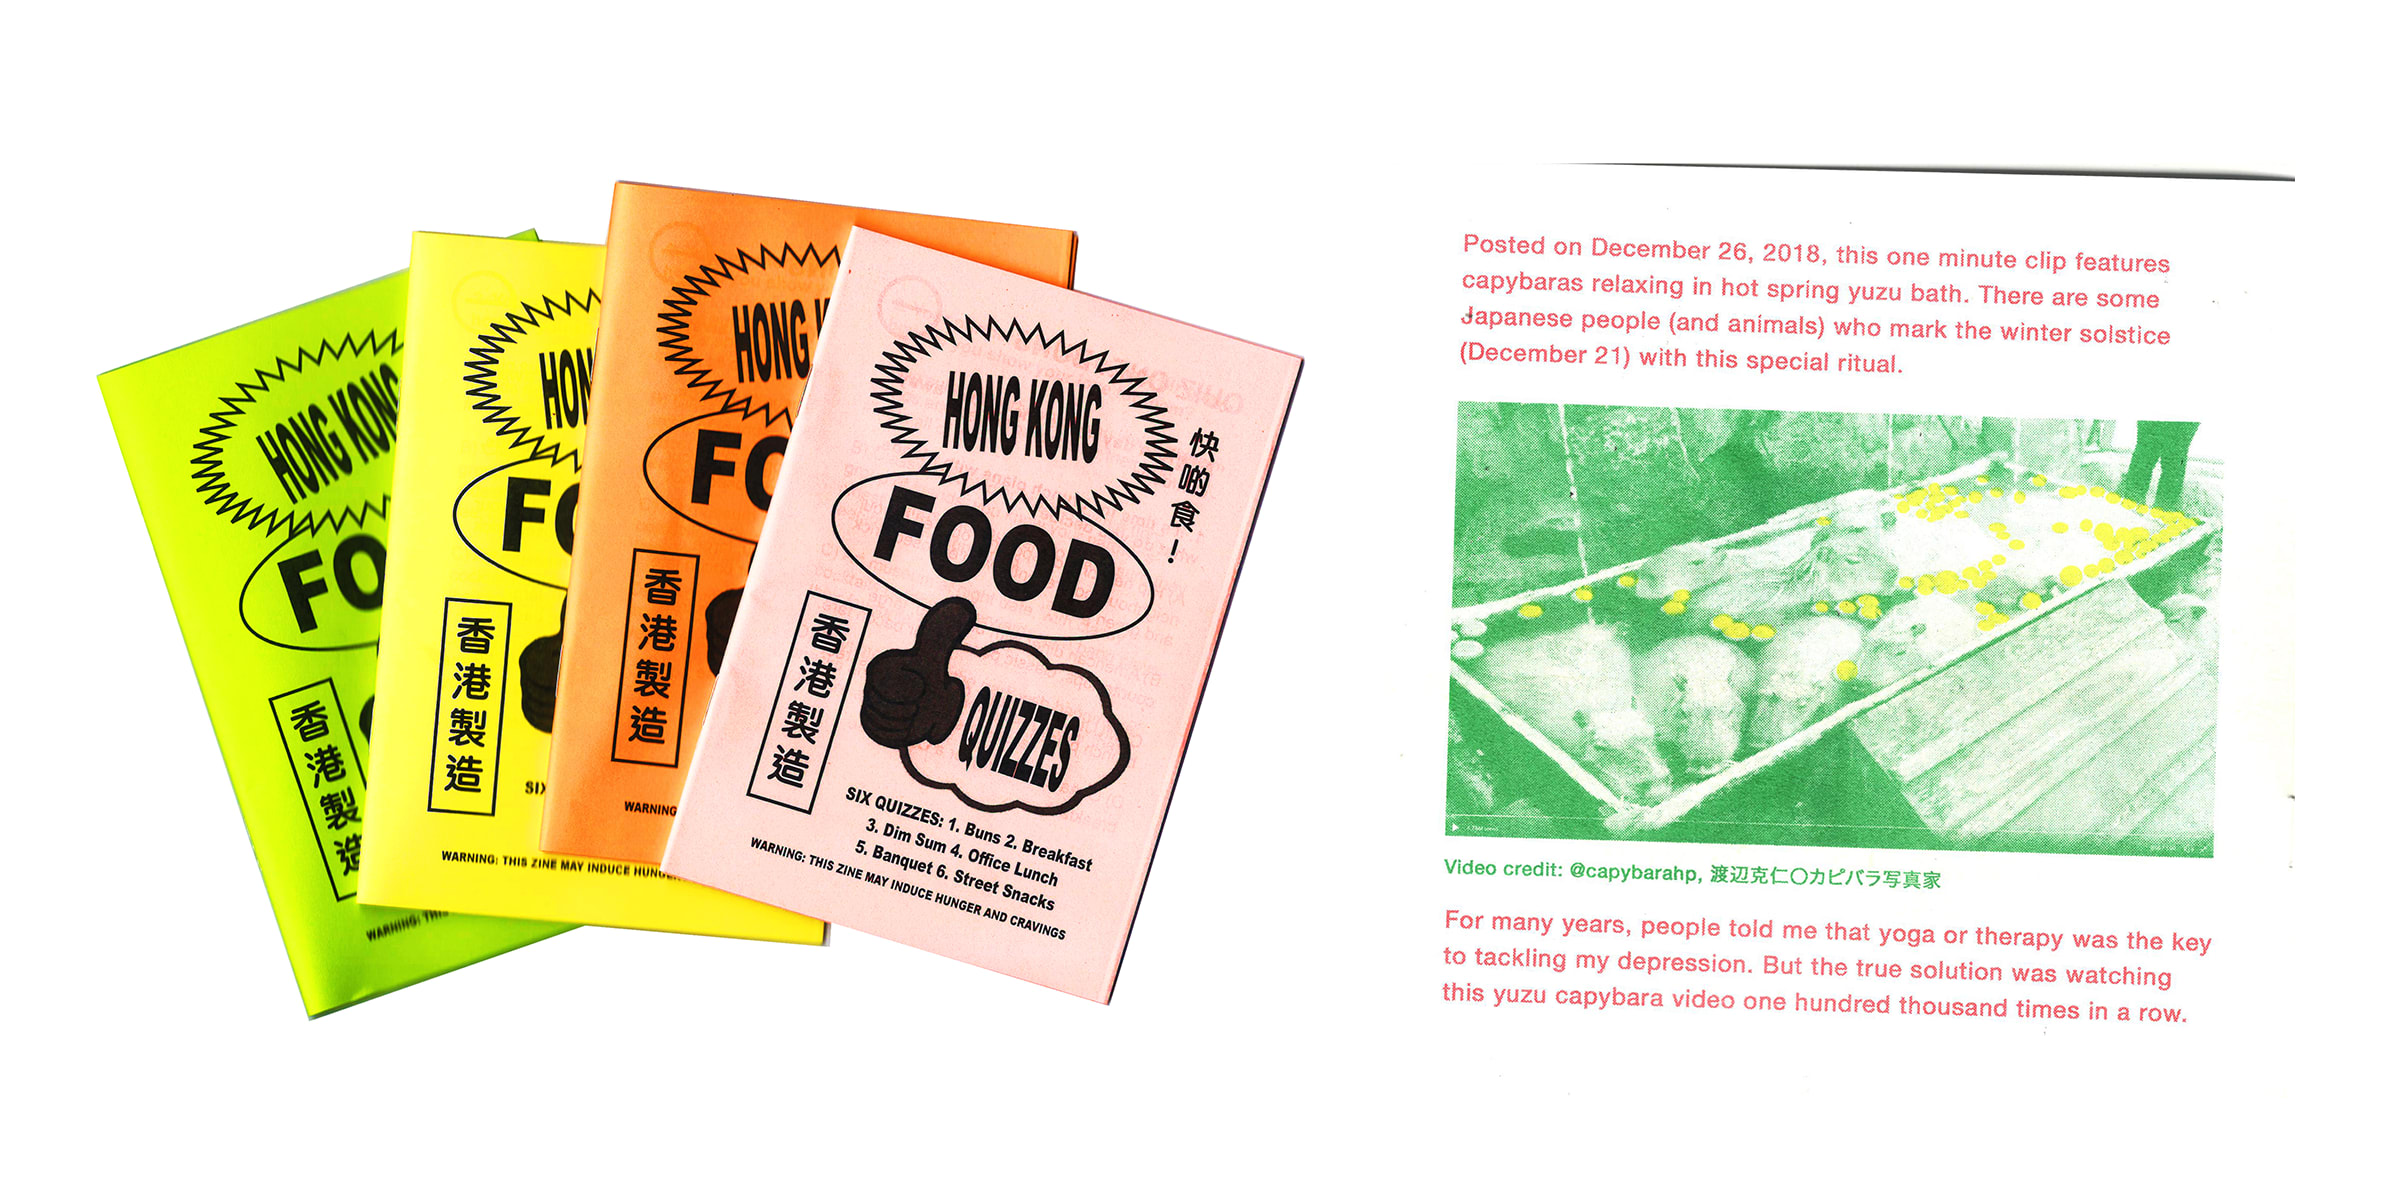 Left: Covers of the zine 'Hong Kong Food Quiz’, 2020. Right: A page from the zine ‘Hallbong/Yuzu’, 2019. All zines by Kaitlin Chan. Courtesy of the artist.